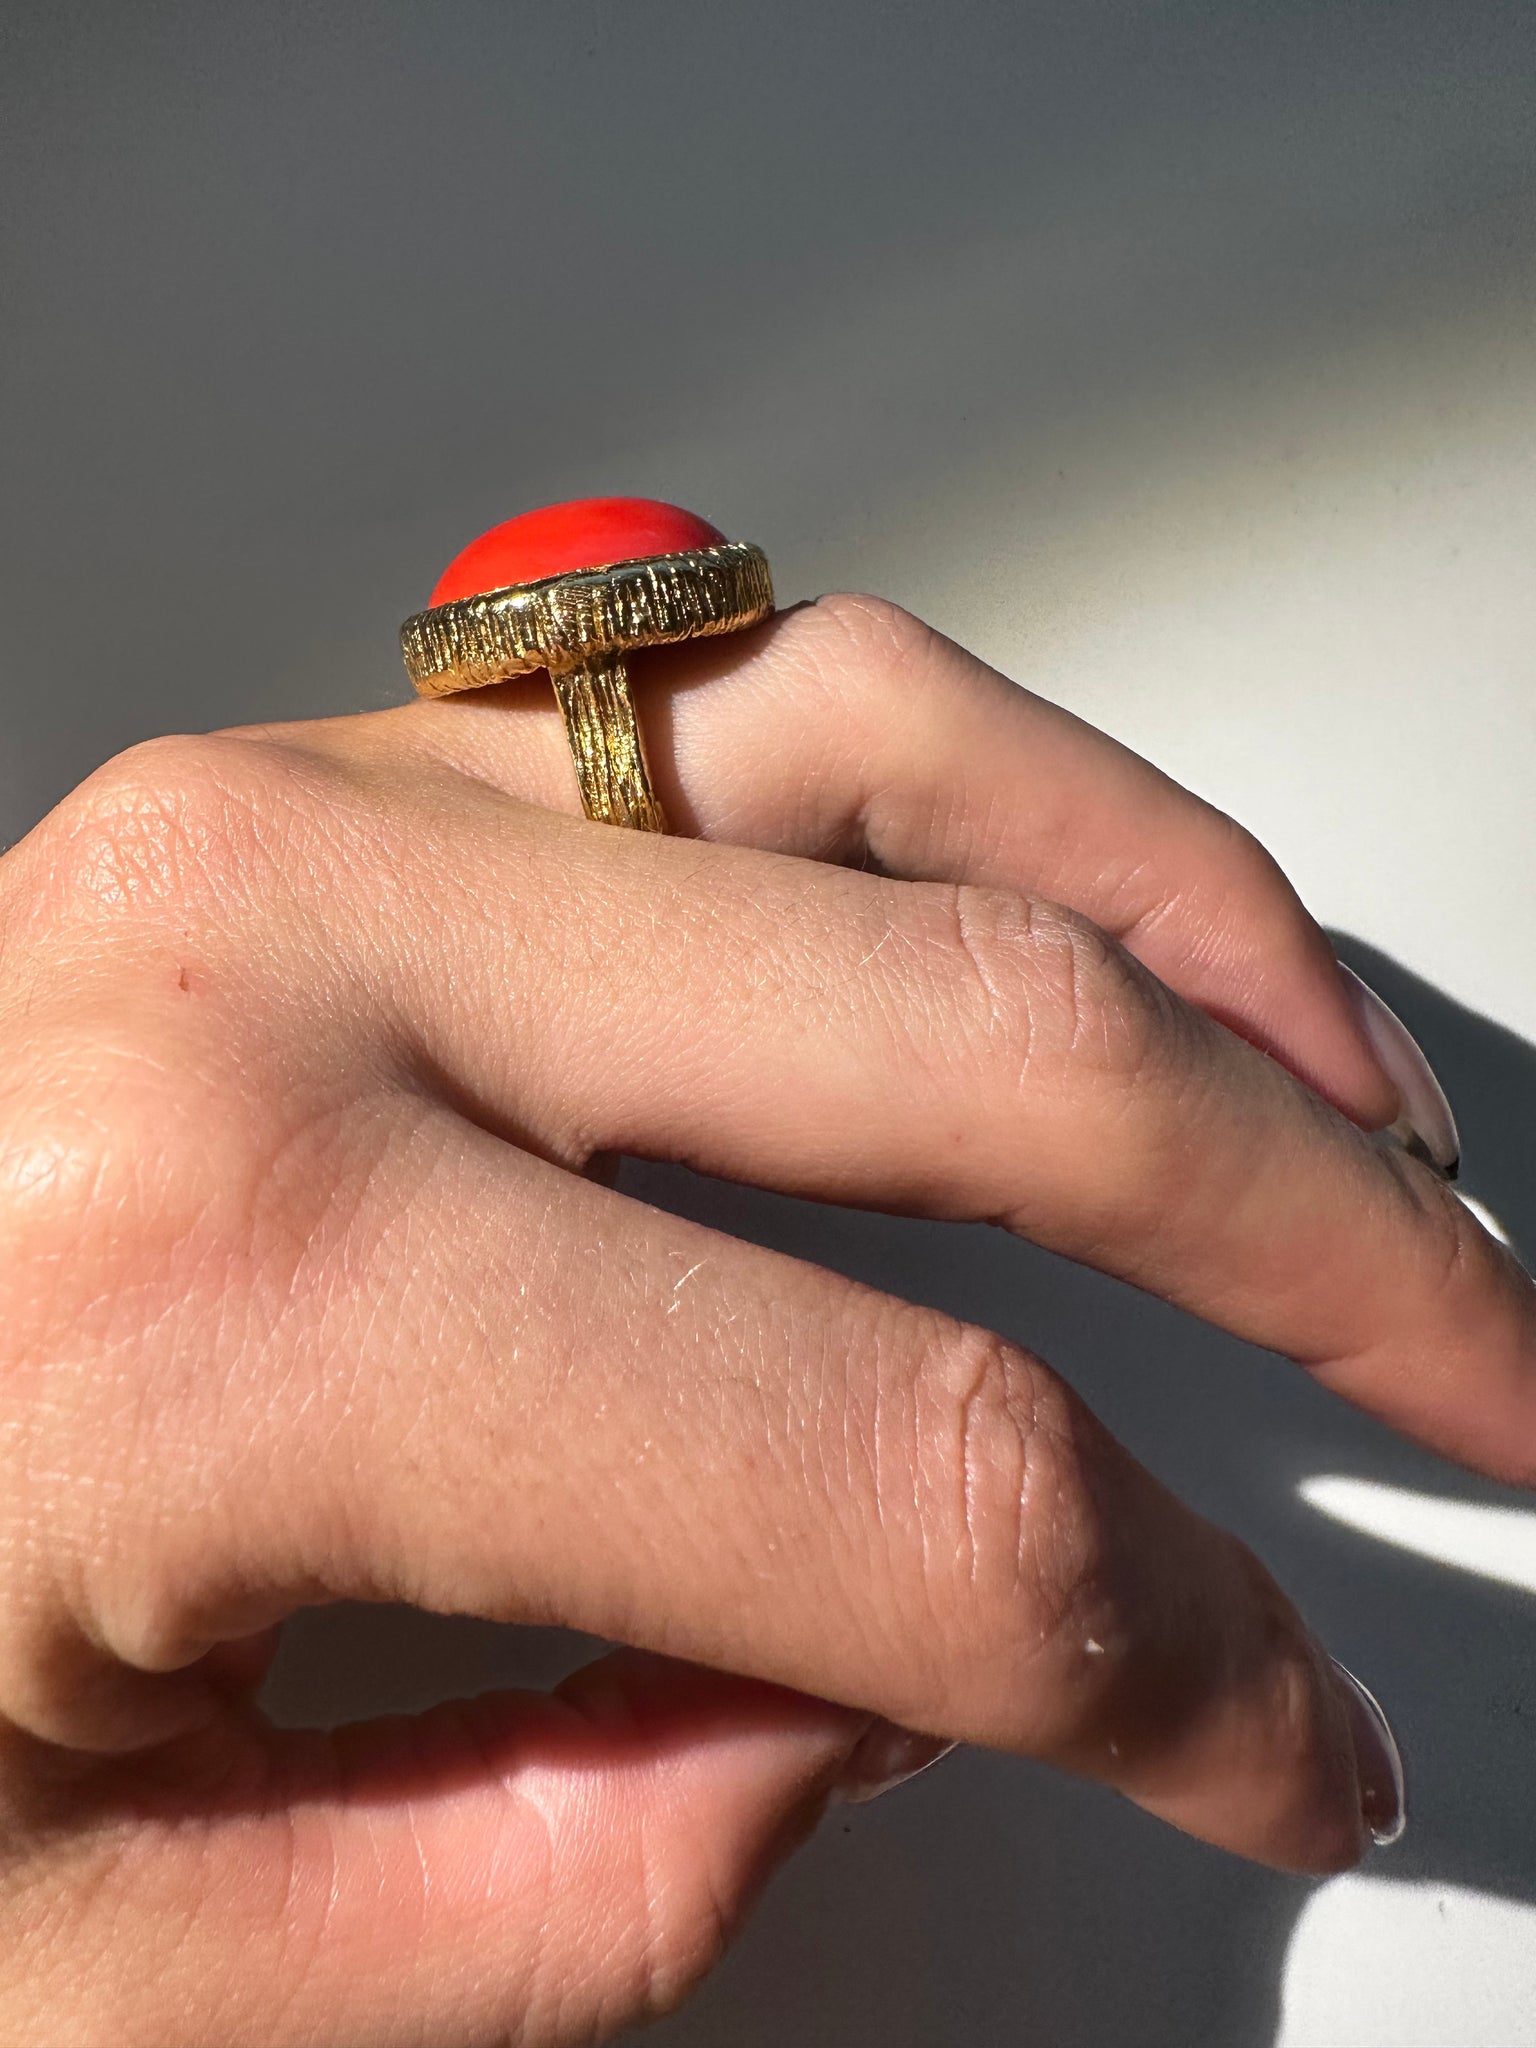 CORAL COCKTAIL RING SZ 6